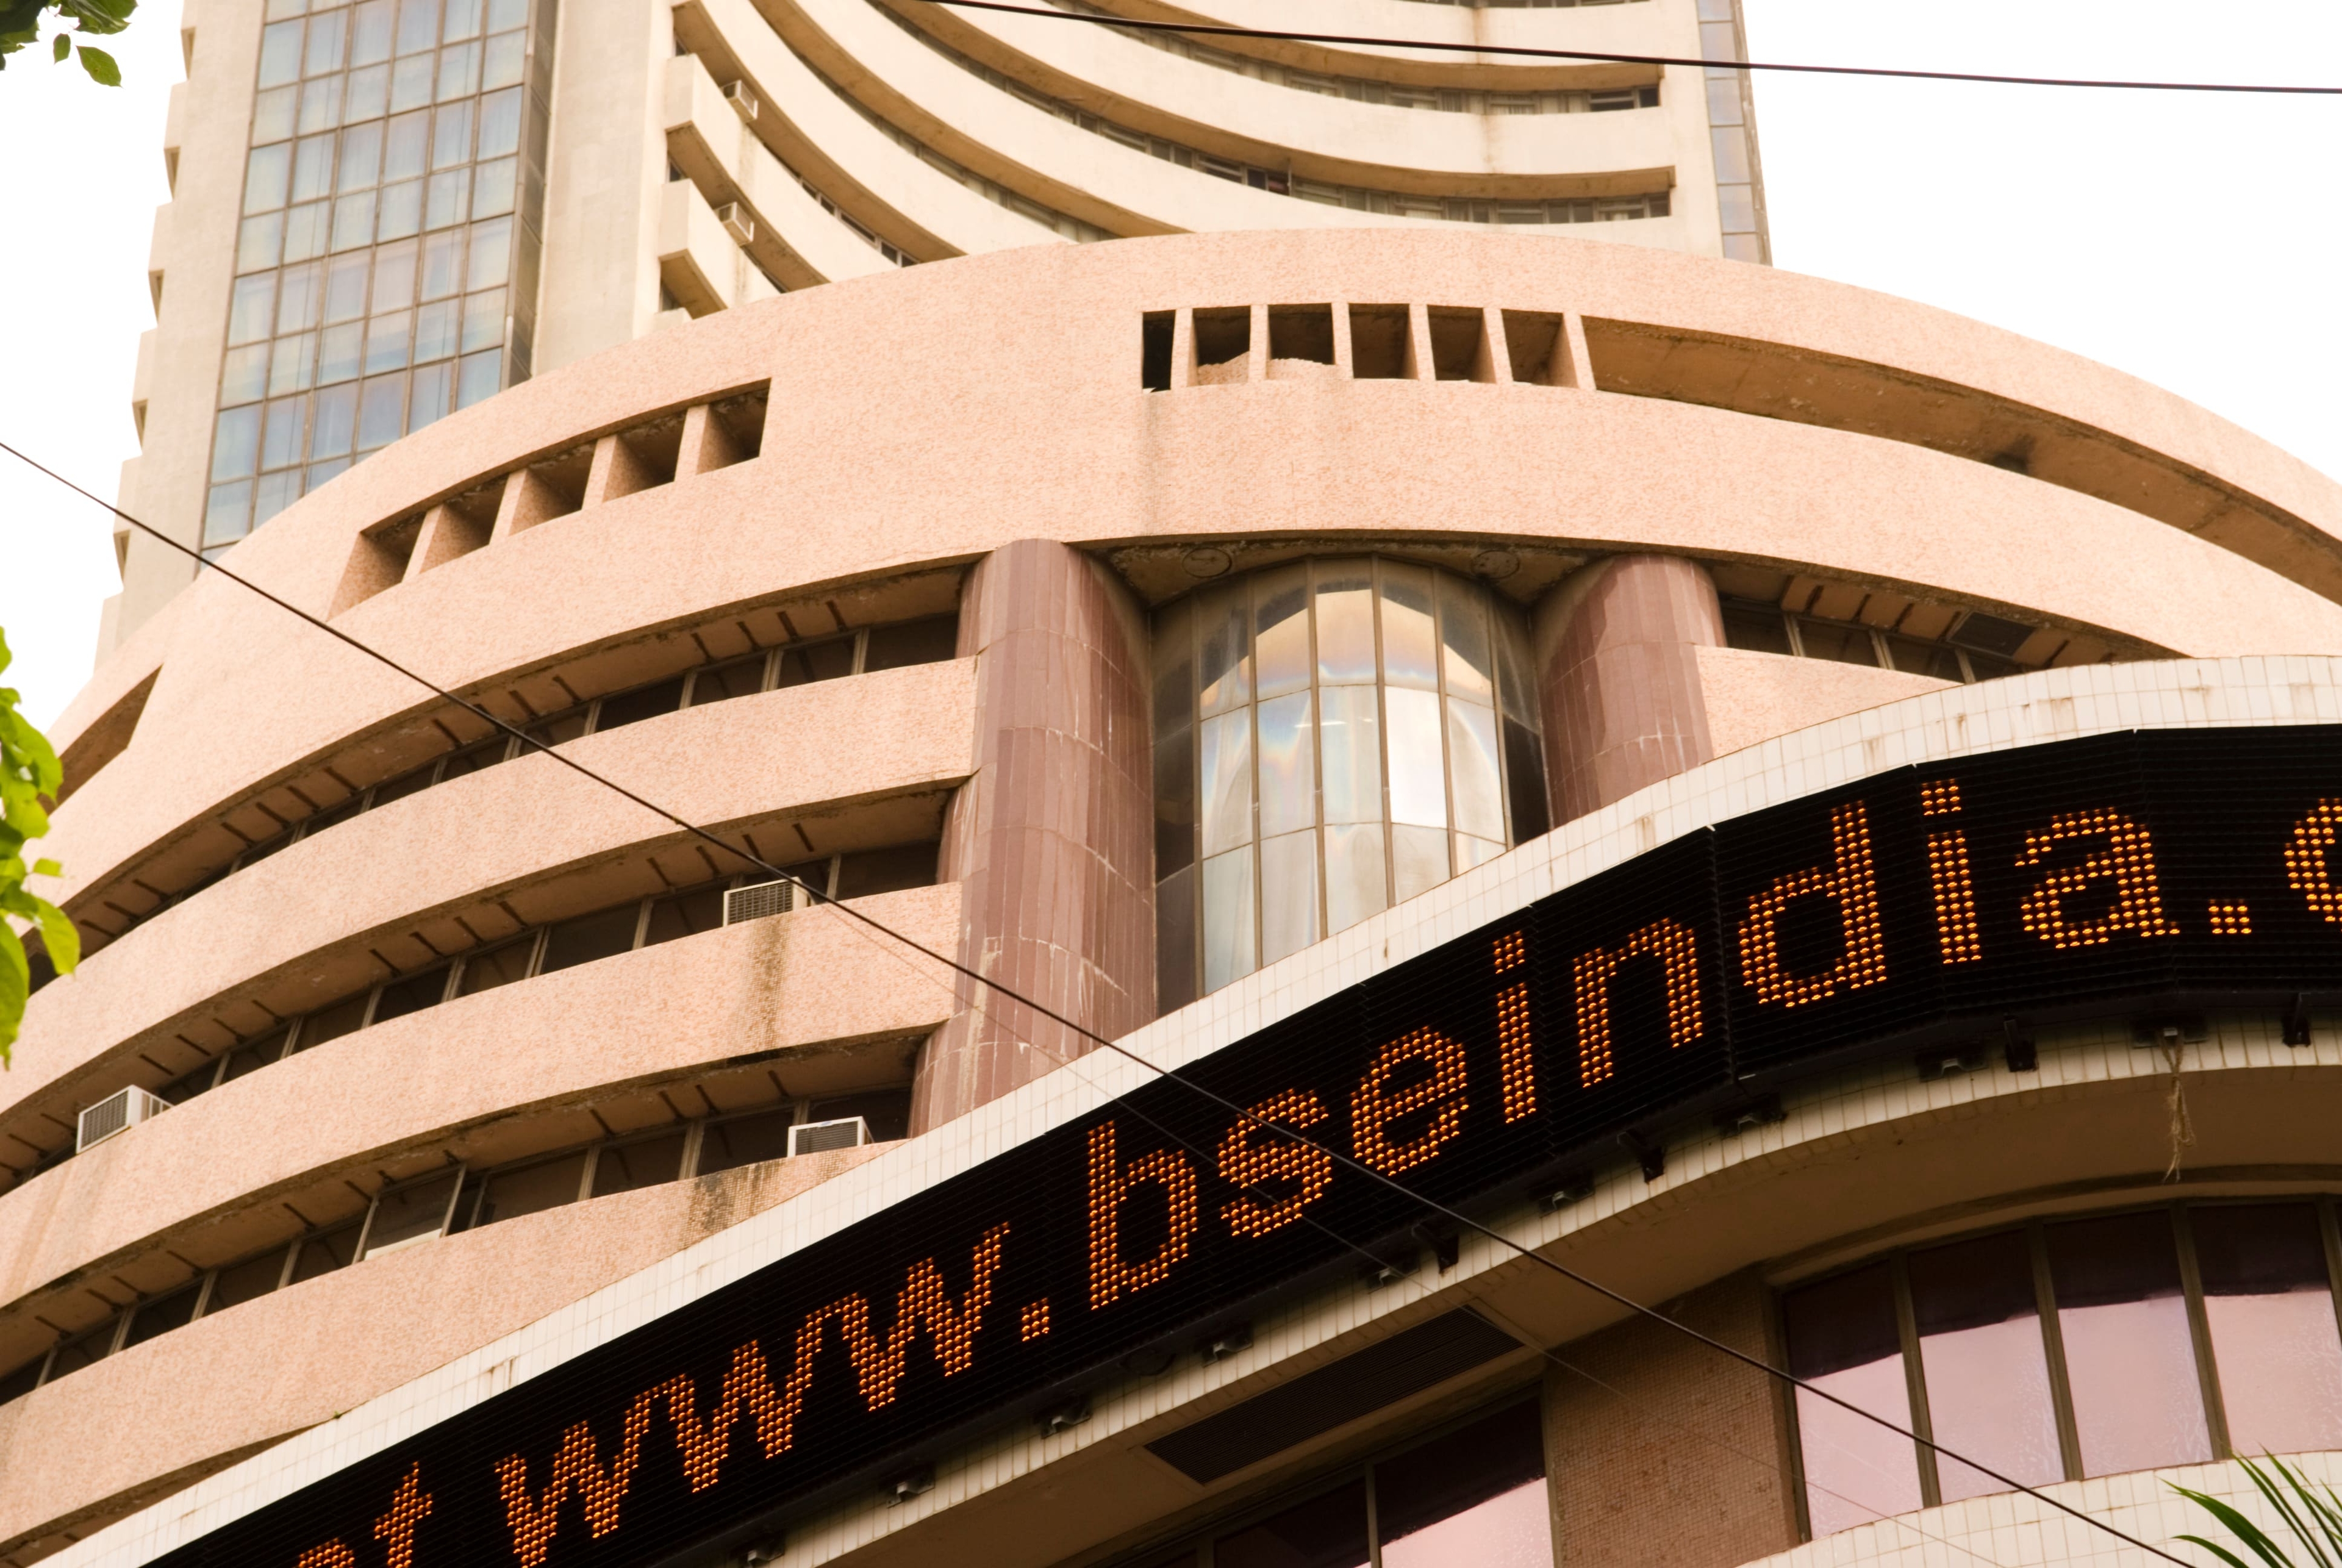 Frontline indices the Sensex and the Nifty ended in the red for the second consecutive day on March 24 amid weak global cues. Investor sentiment remained fragile as the Ukraine war continues while the Western leaders are meeting in Brussels to discuss increasing military aid to Ukraine. Sensex opened at 57,190.05 against the previous close of 57,684.82 and remained choppy throughout the session. Eventually, the 30-share pack closed with a loss of 89 points, or 0.15 percent, at 57,595.68 while the Nifty settled 23 points, or 0.13 percent, lower at 17,222.75.